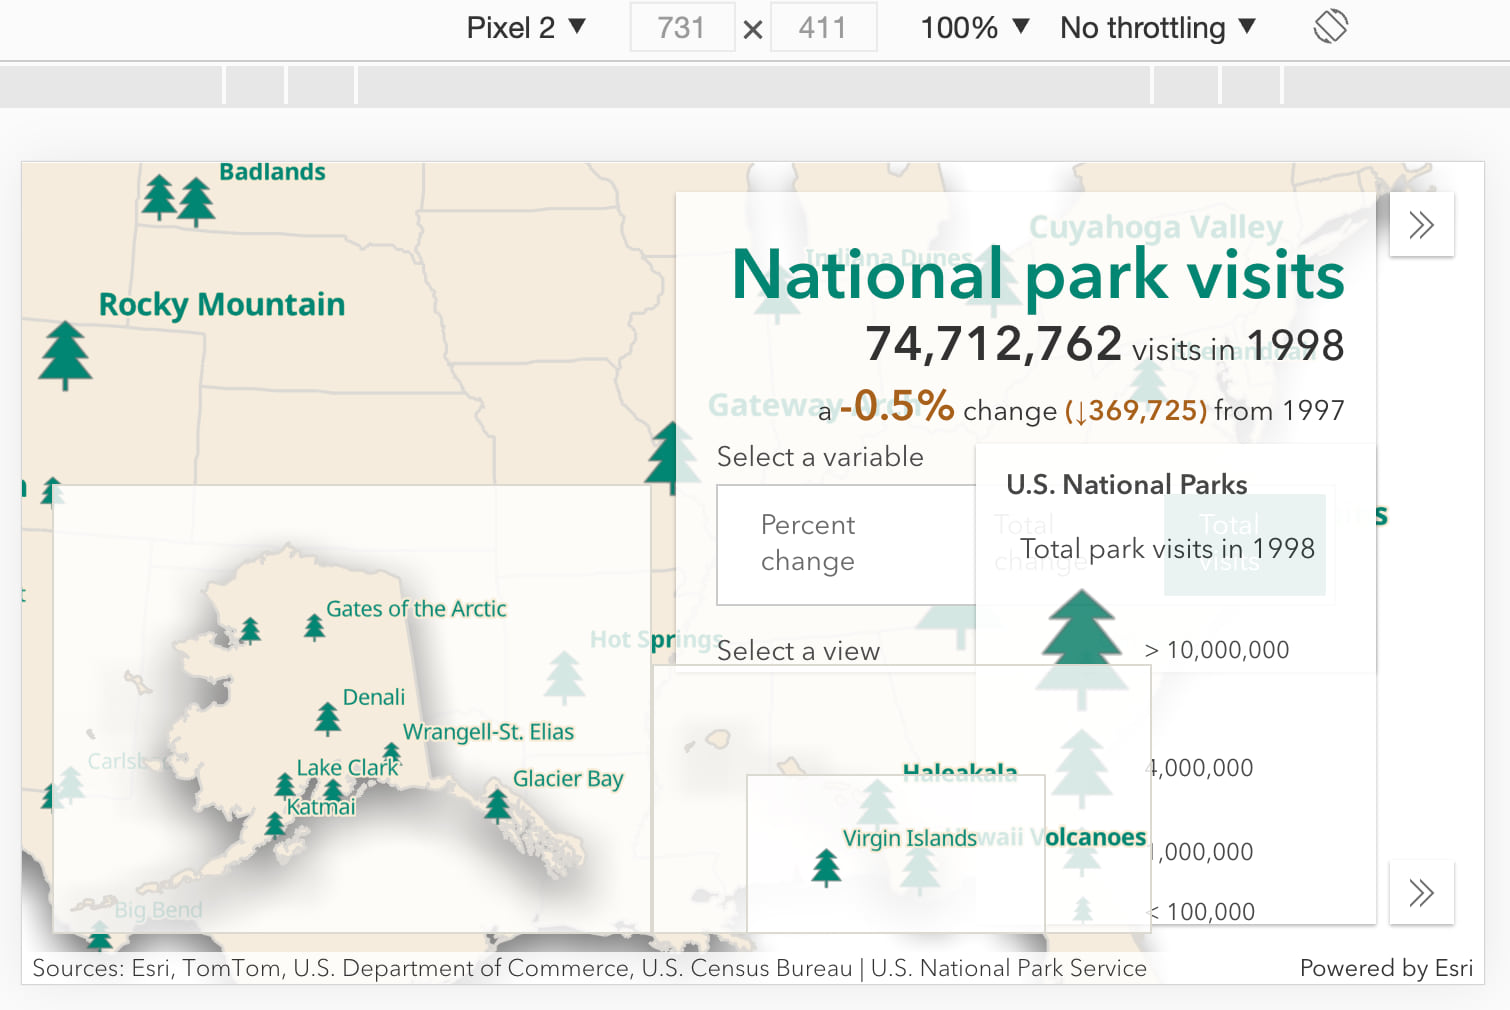 The National Parks app as displayed on a Pixel 2 when not designed for mobile viewing.